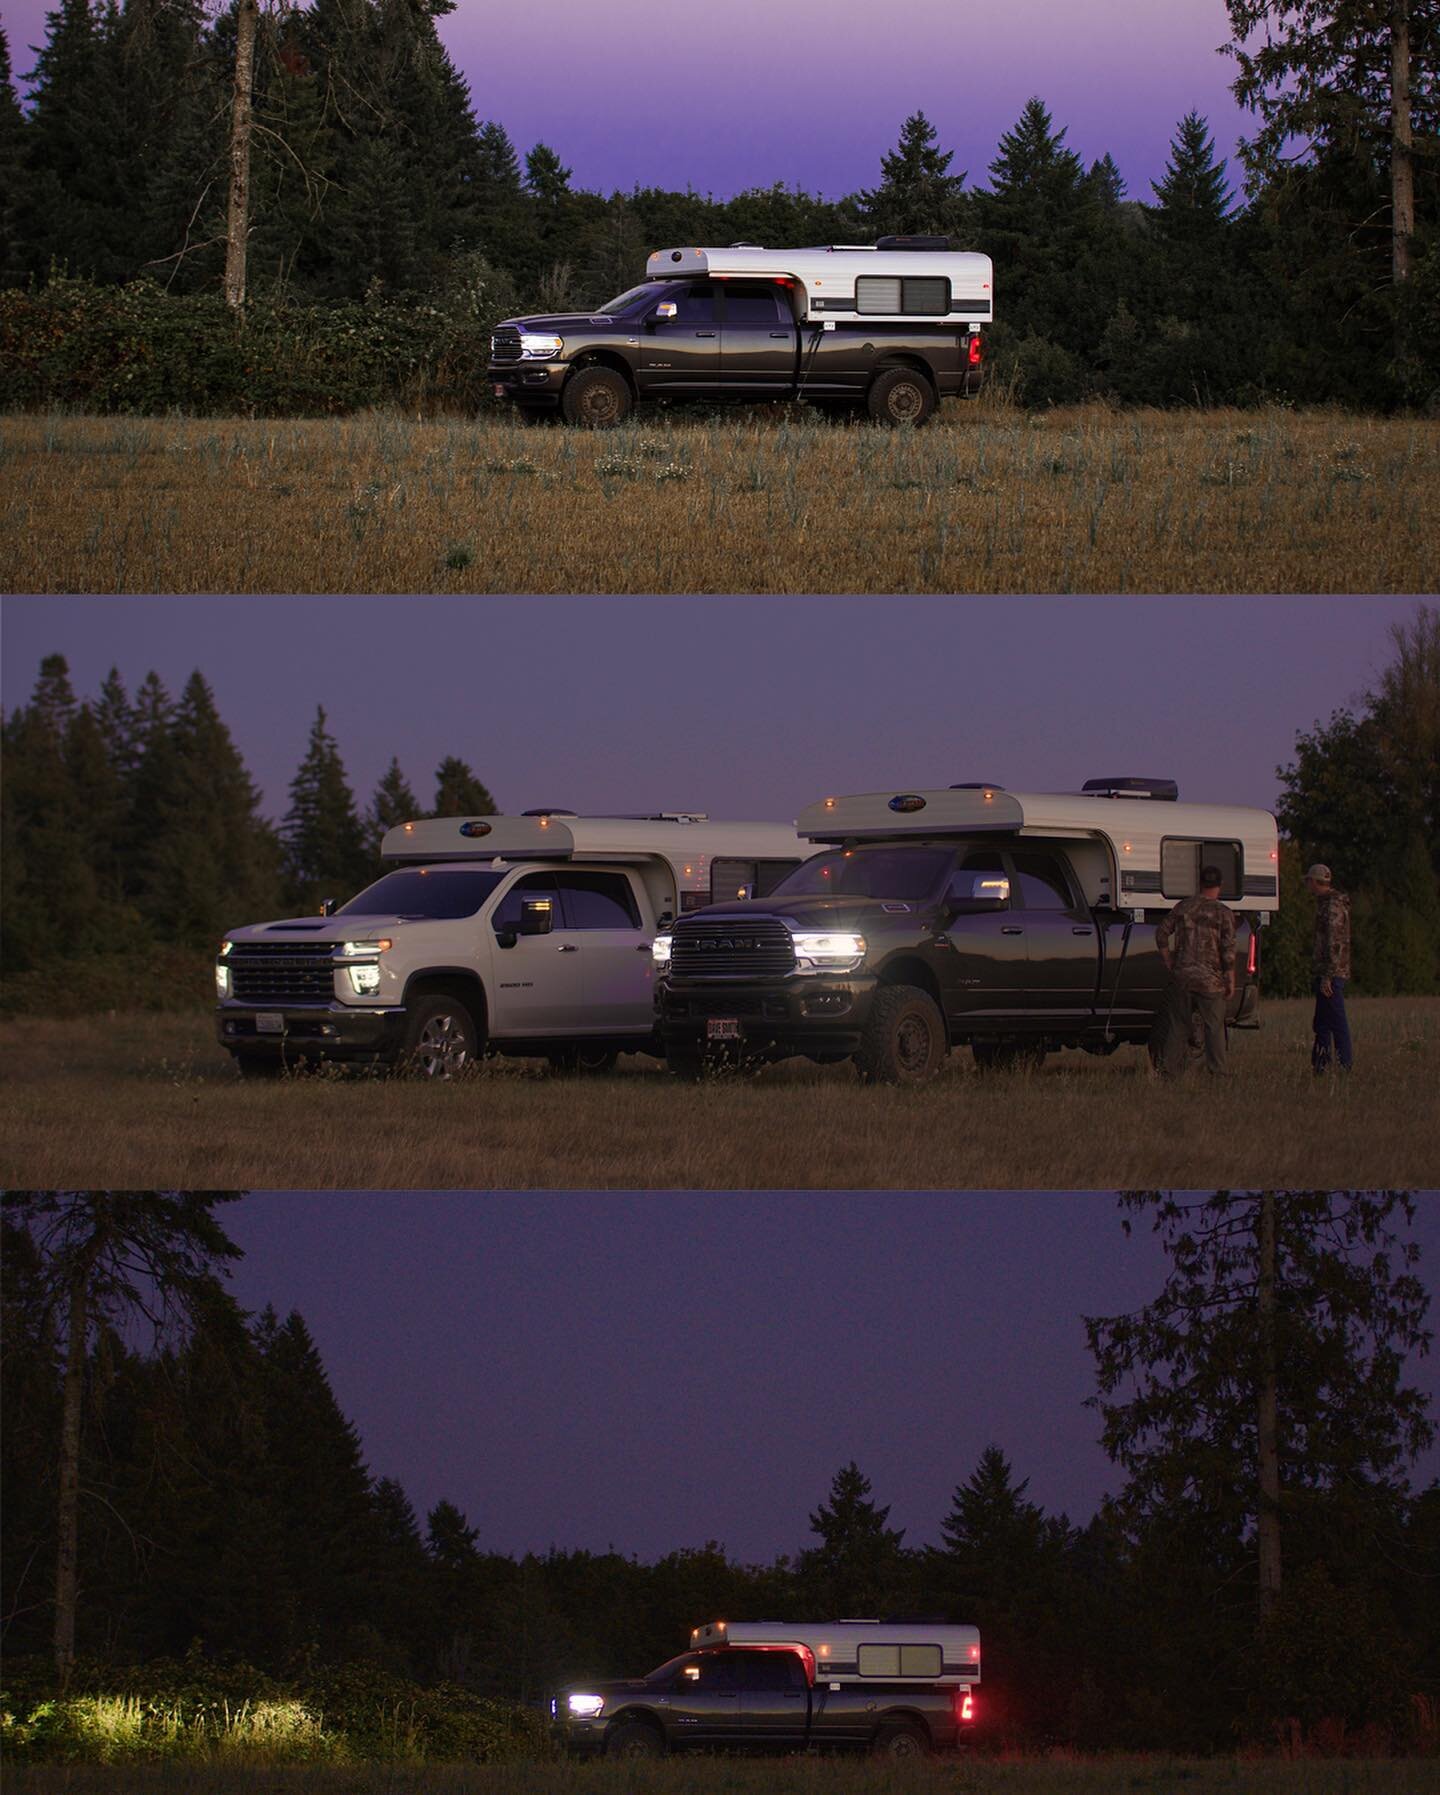 Some frames from a recent brand development project with Alaskan Campers